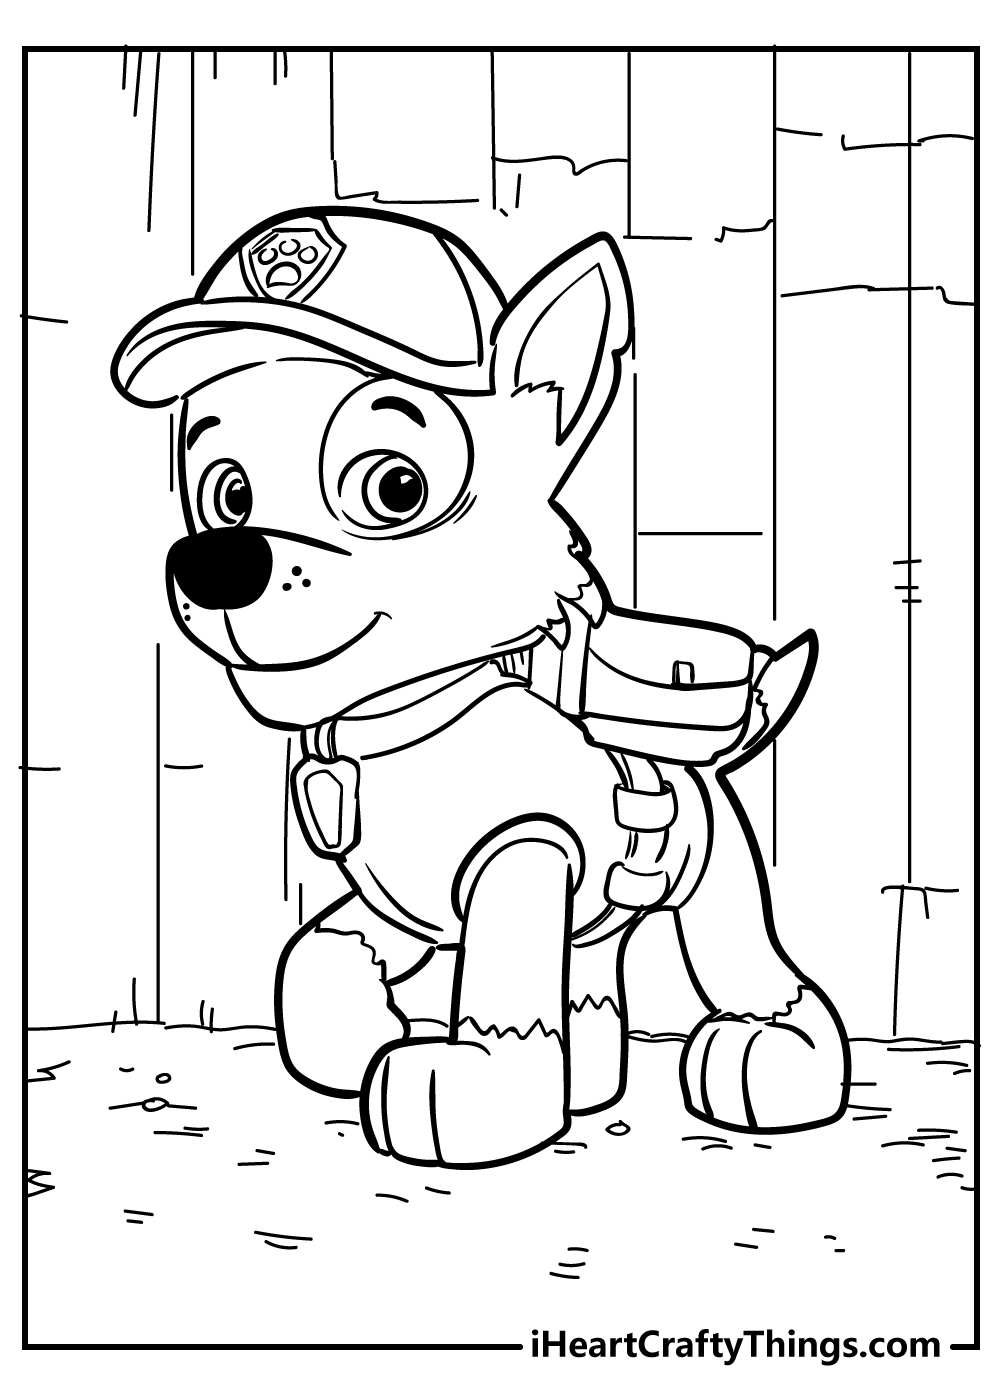 Paw Patrol Coloring Pages FREE Printable 130